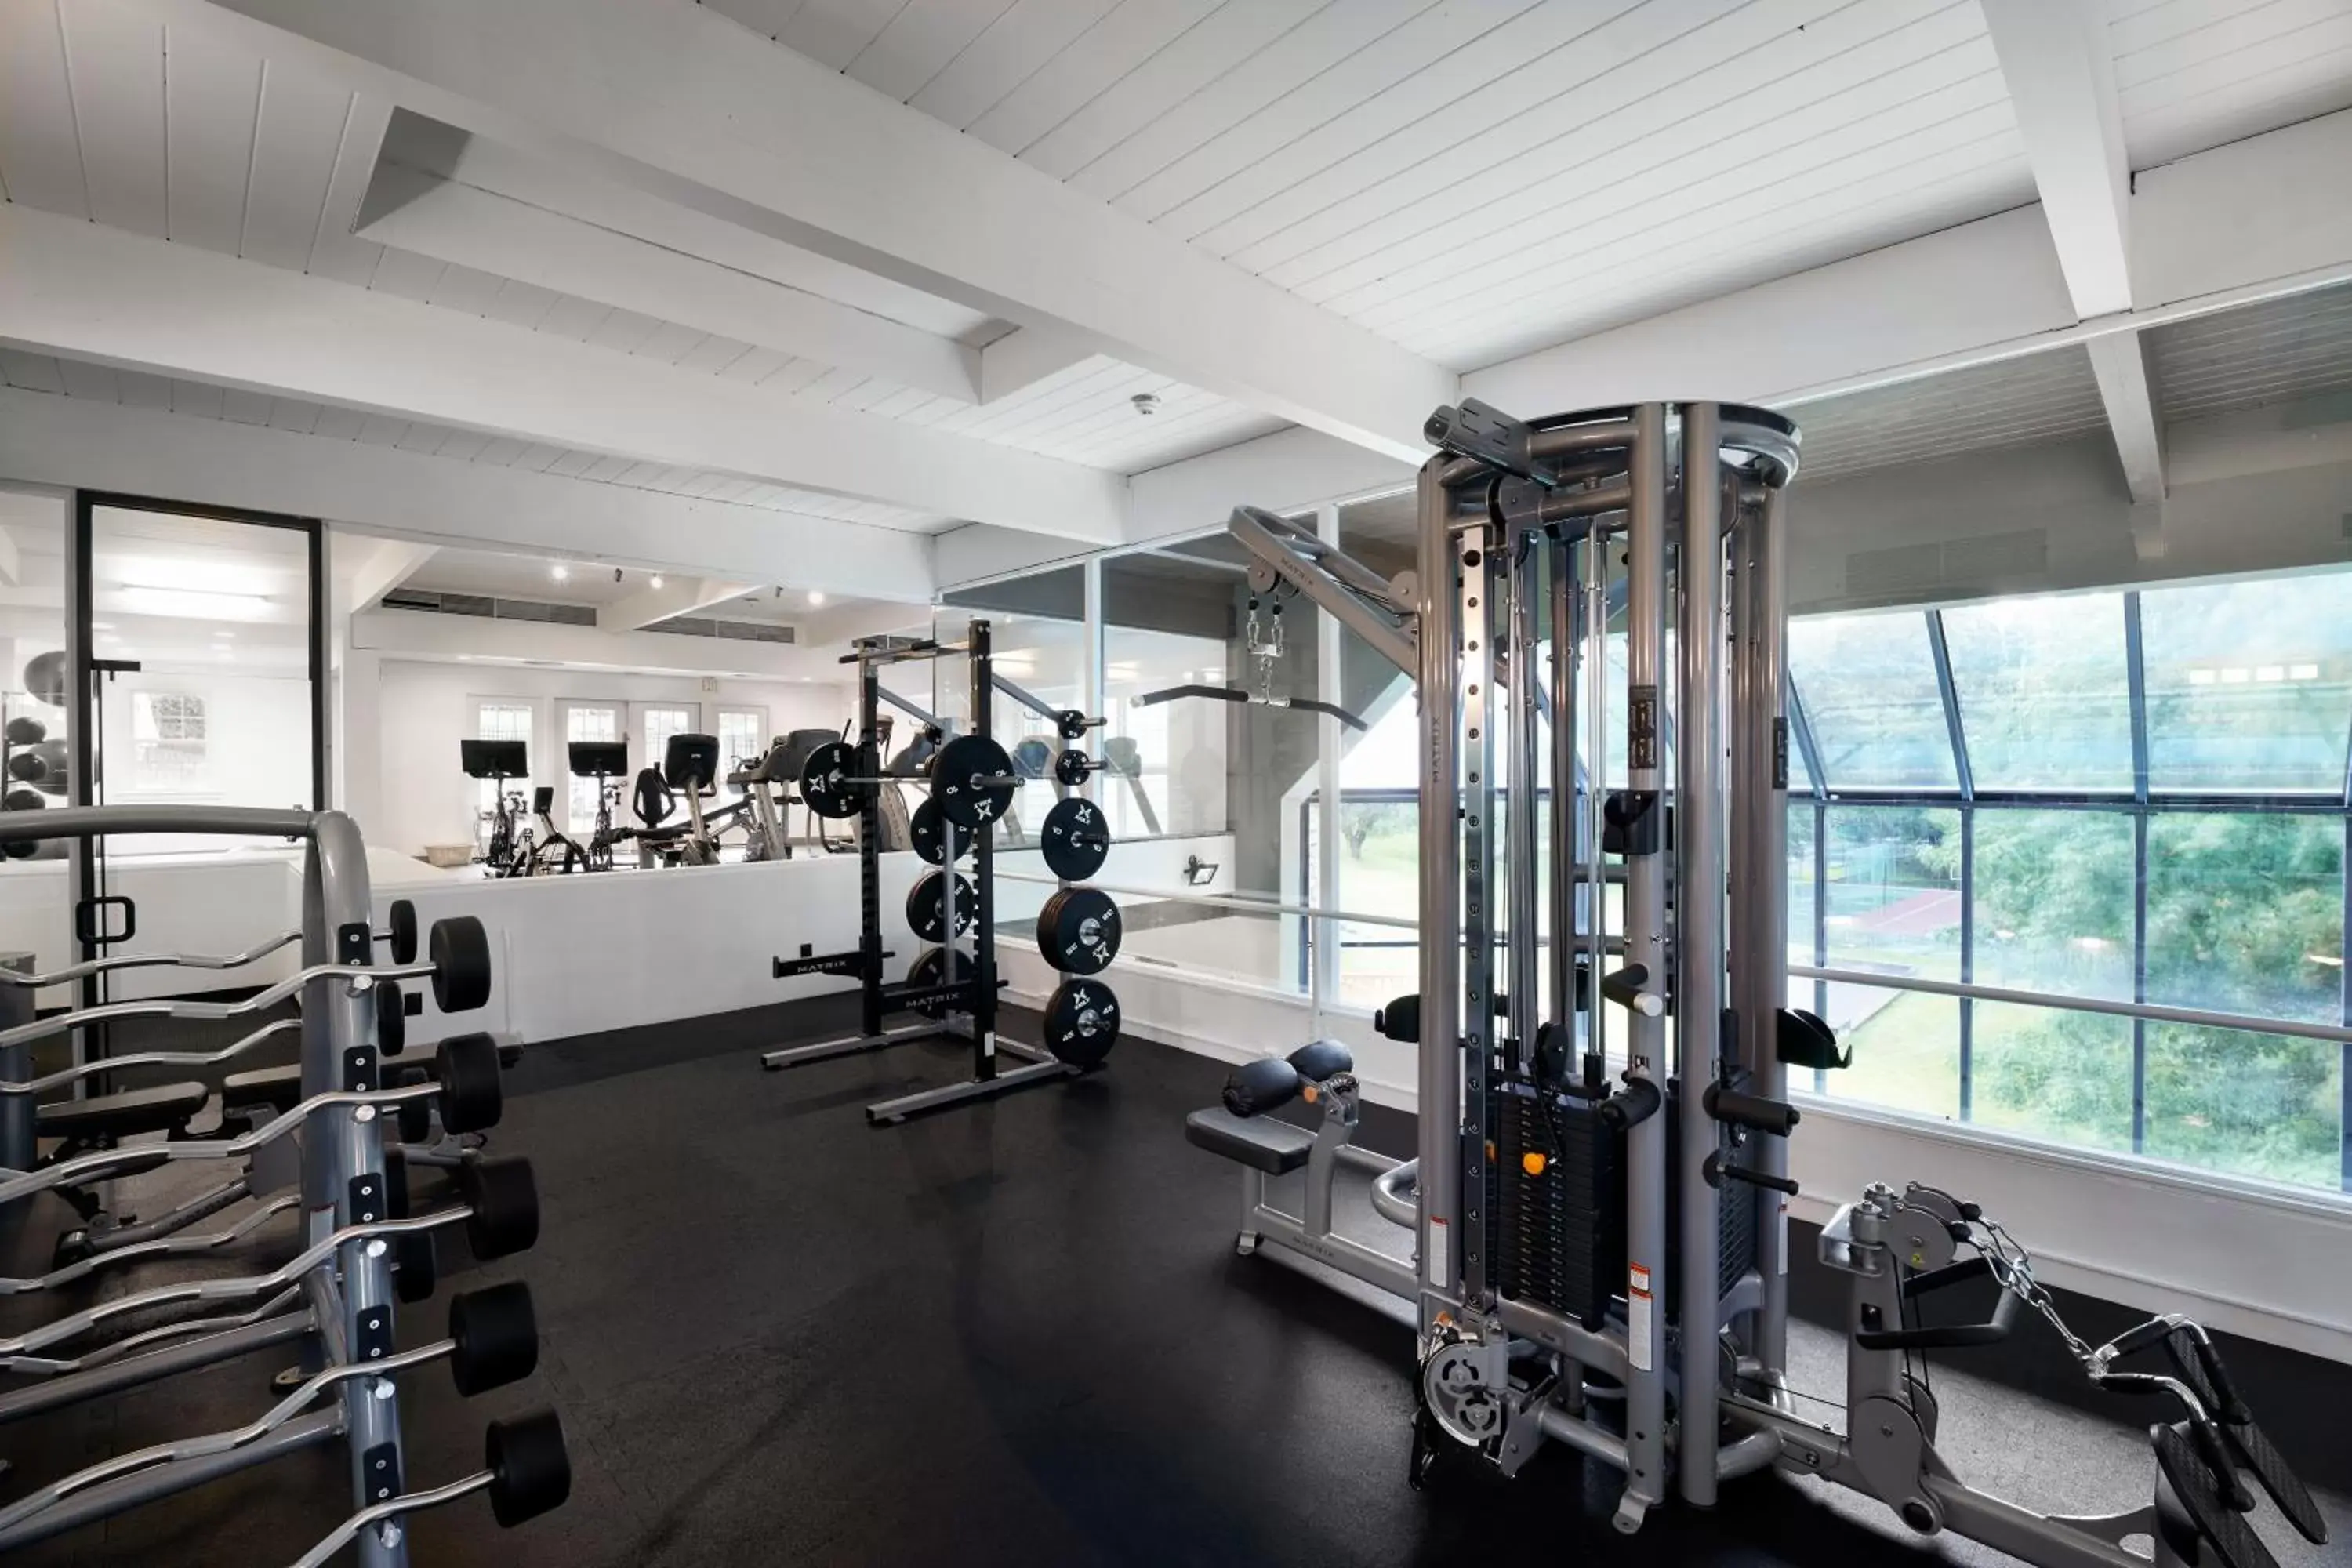 Fitness centre/facilities, Fitness Center/Facilities in Tarrytown House Estate on the Hudson